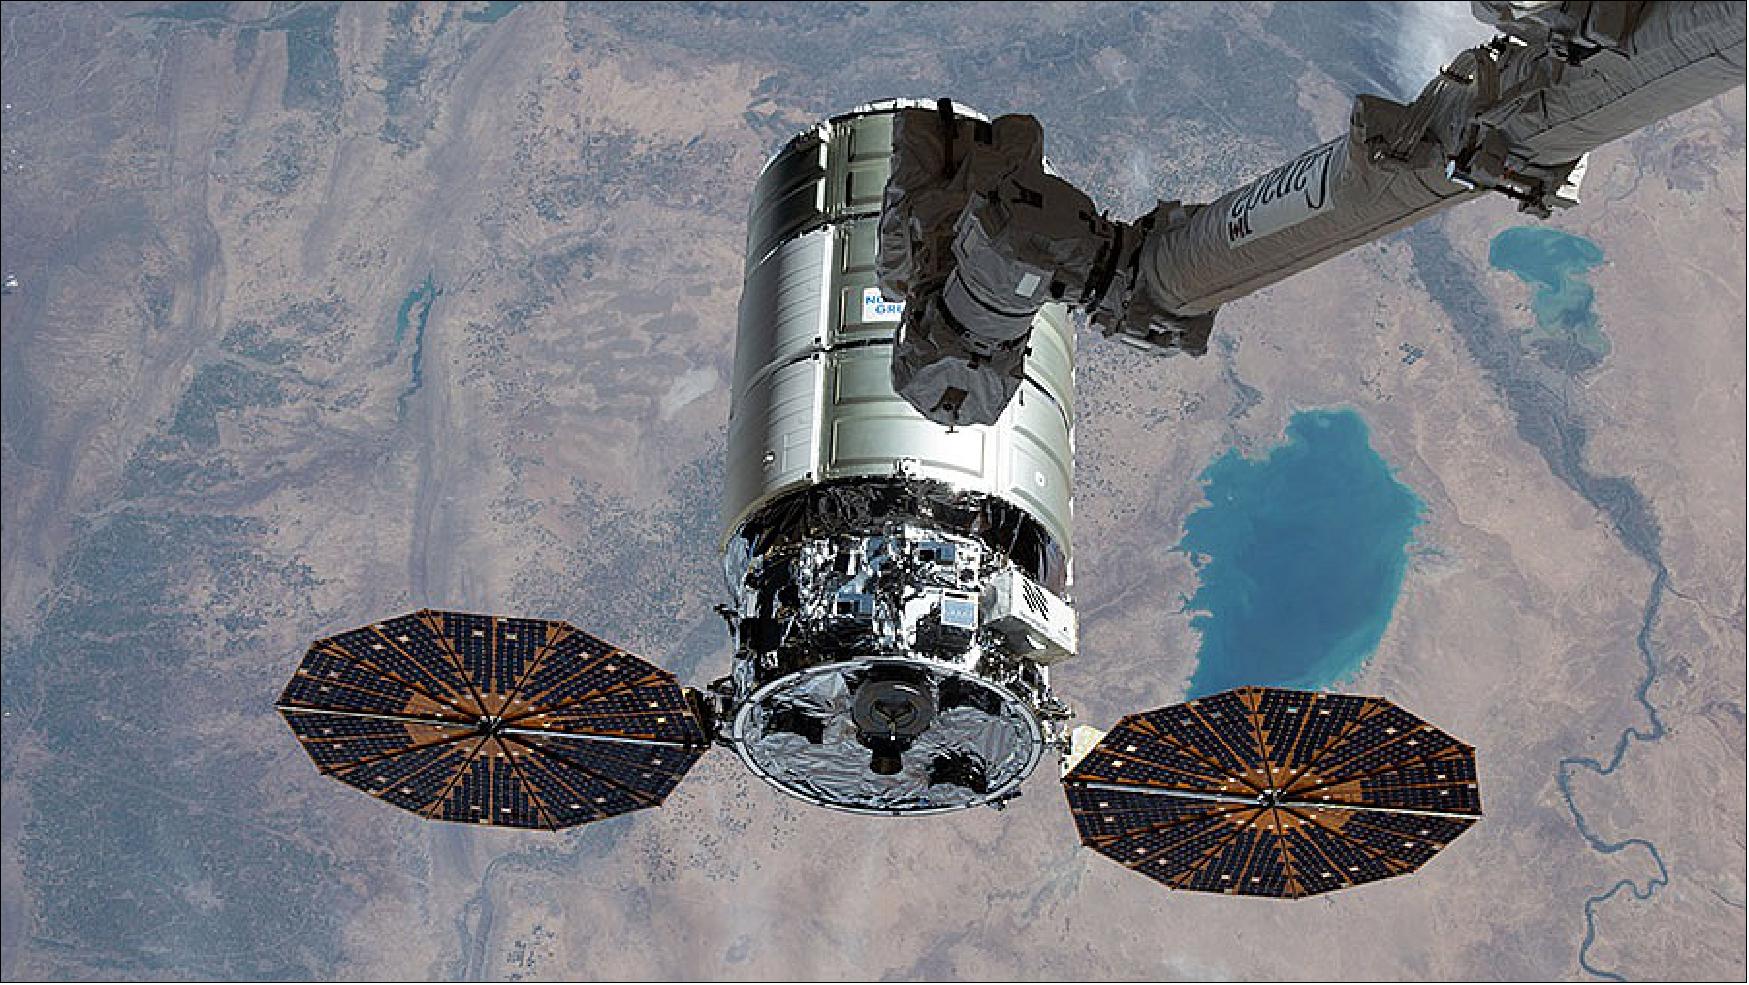 Figure 20: The Cygnus space freighter is pictured moments away from being captured with the Canadarm2 robotic arm above northern Iraq on Feb. 21, 2022 (image credit: NASA TV)